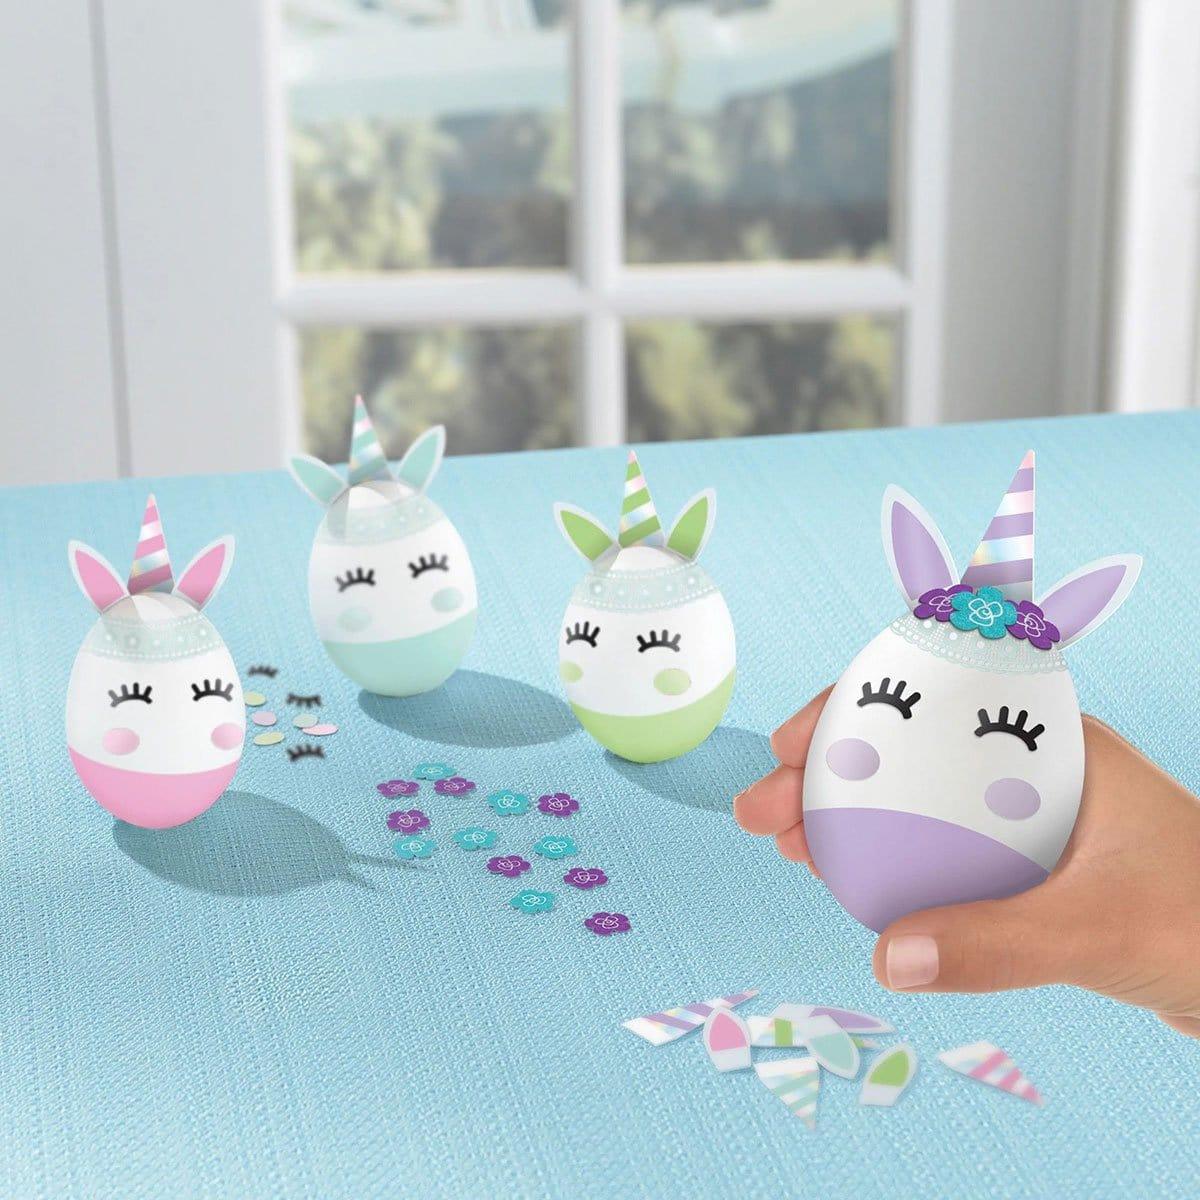 Buy Easter Unicorn Egg Decoration Kit sold at Party Expert